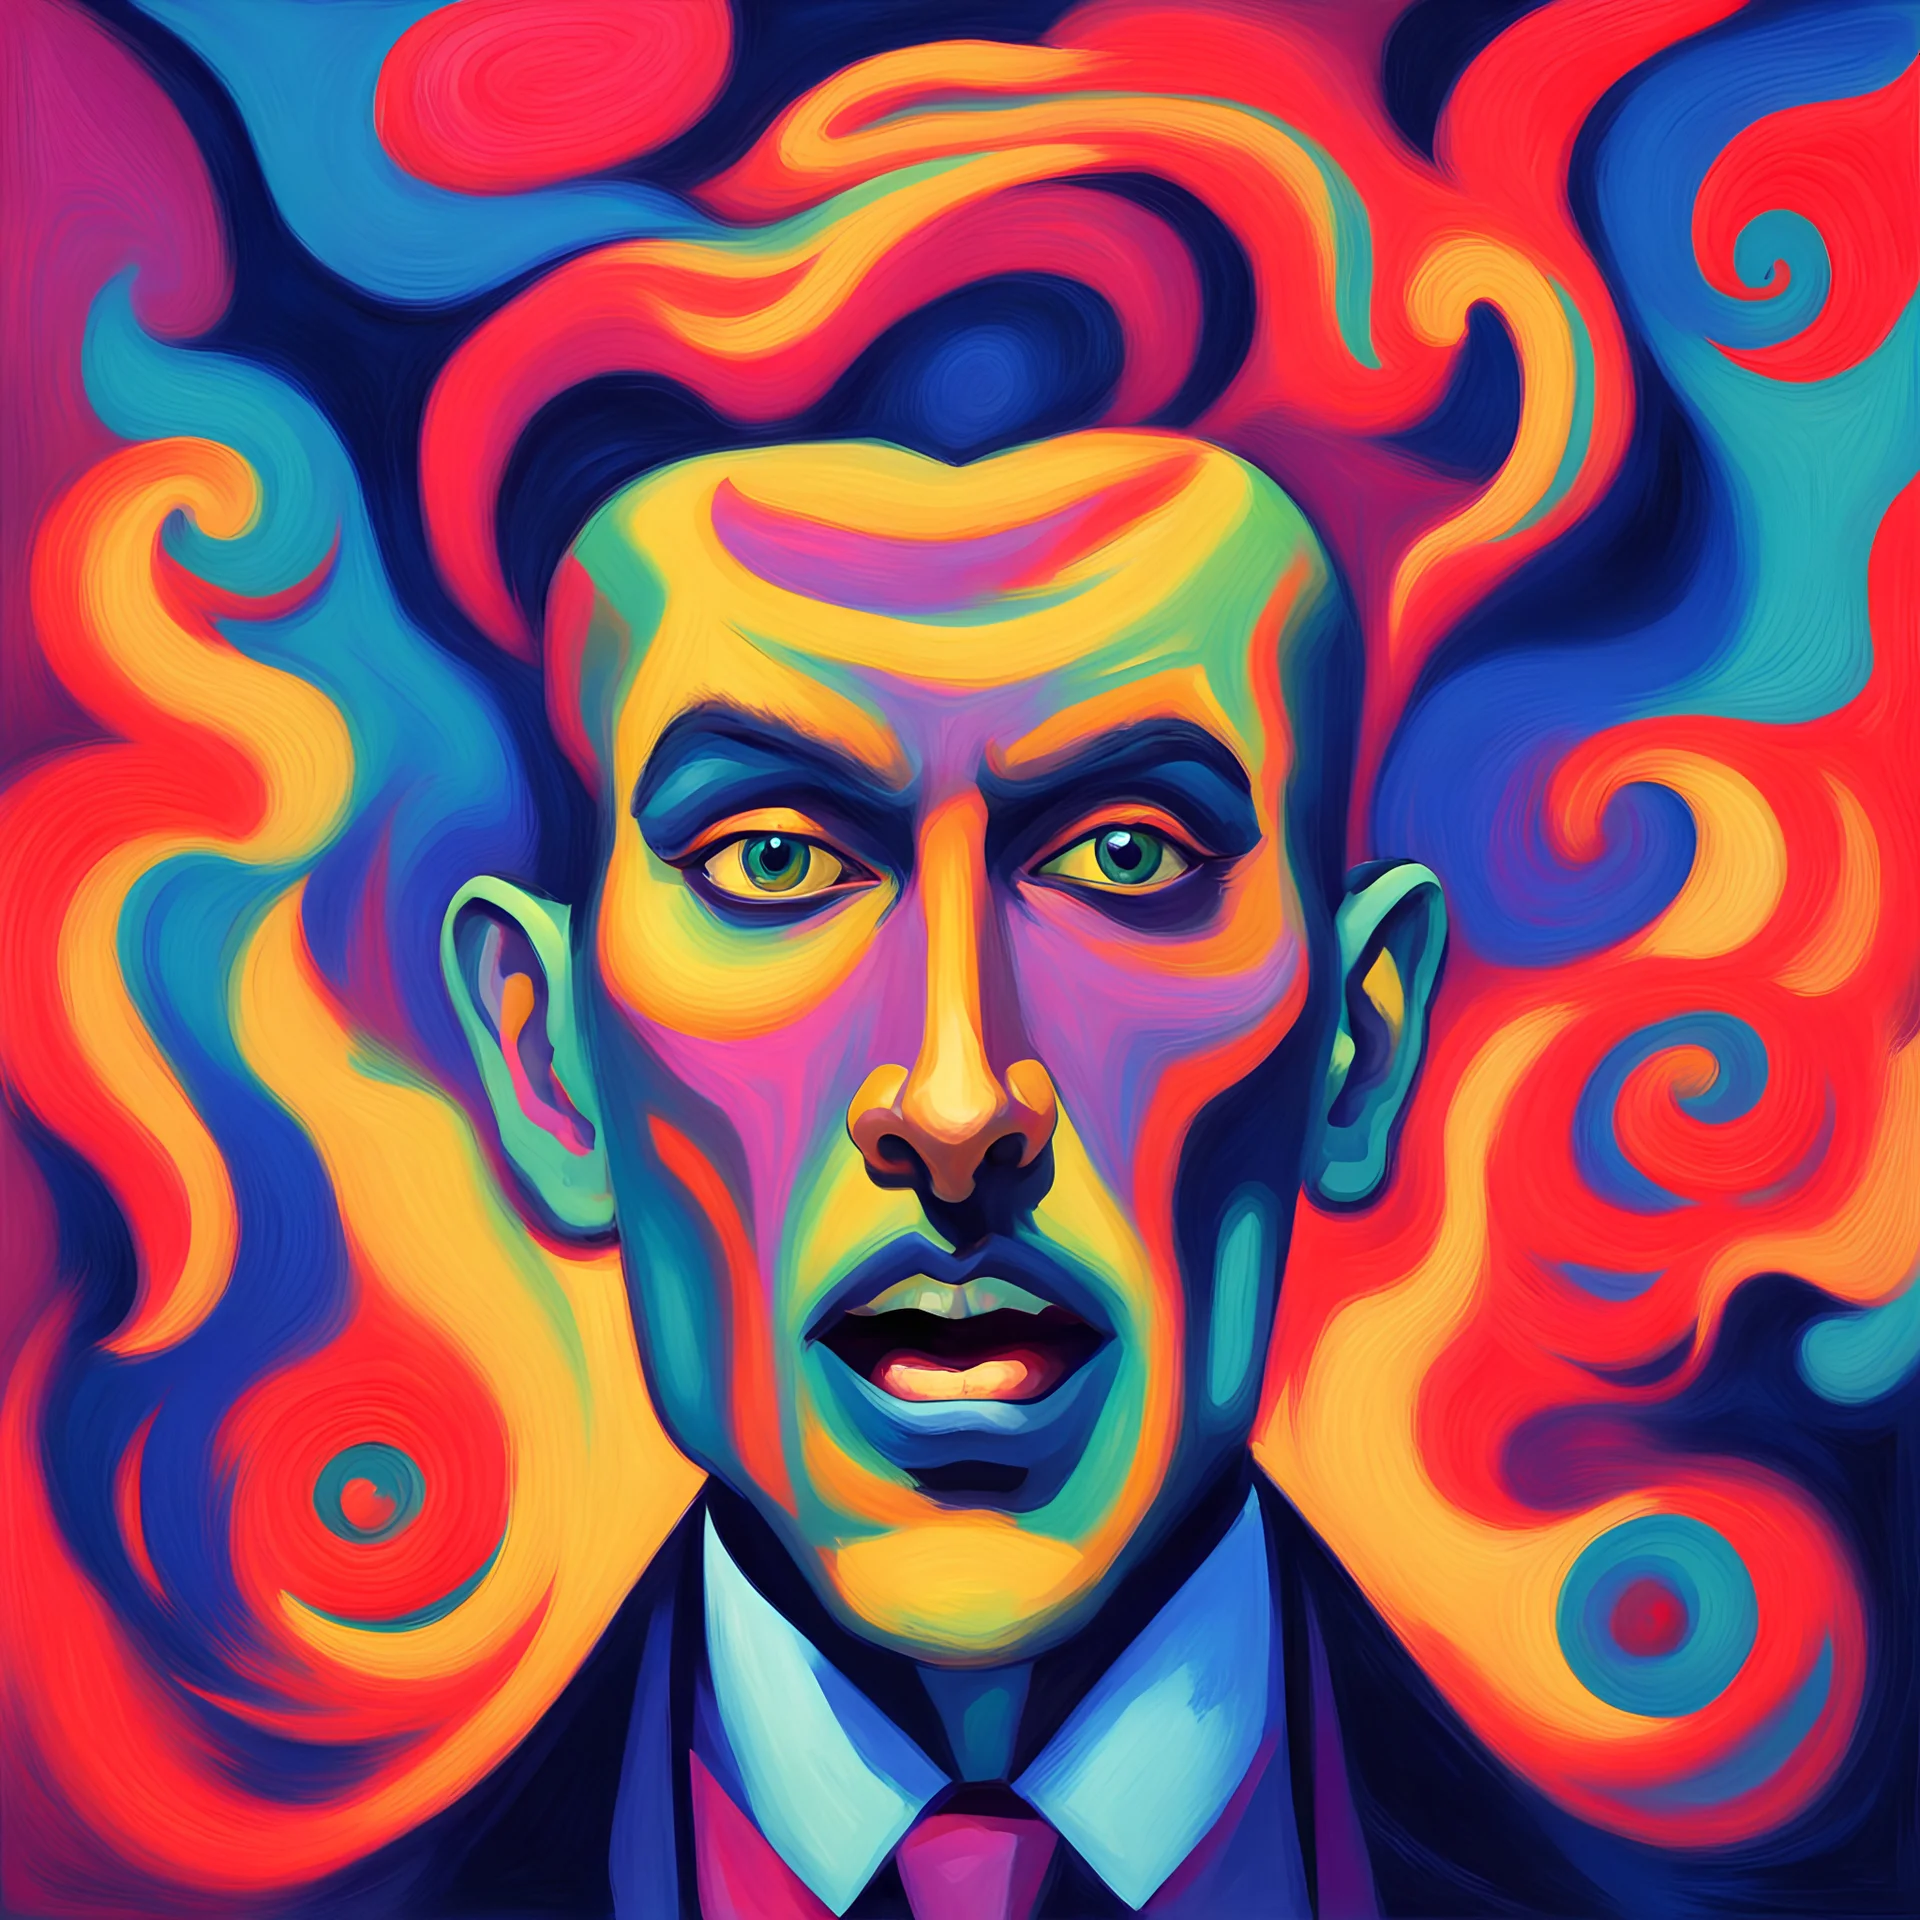 Illusionist in Monster fauvism art style